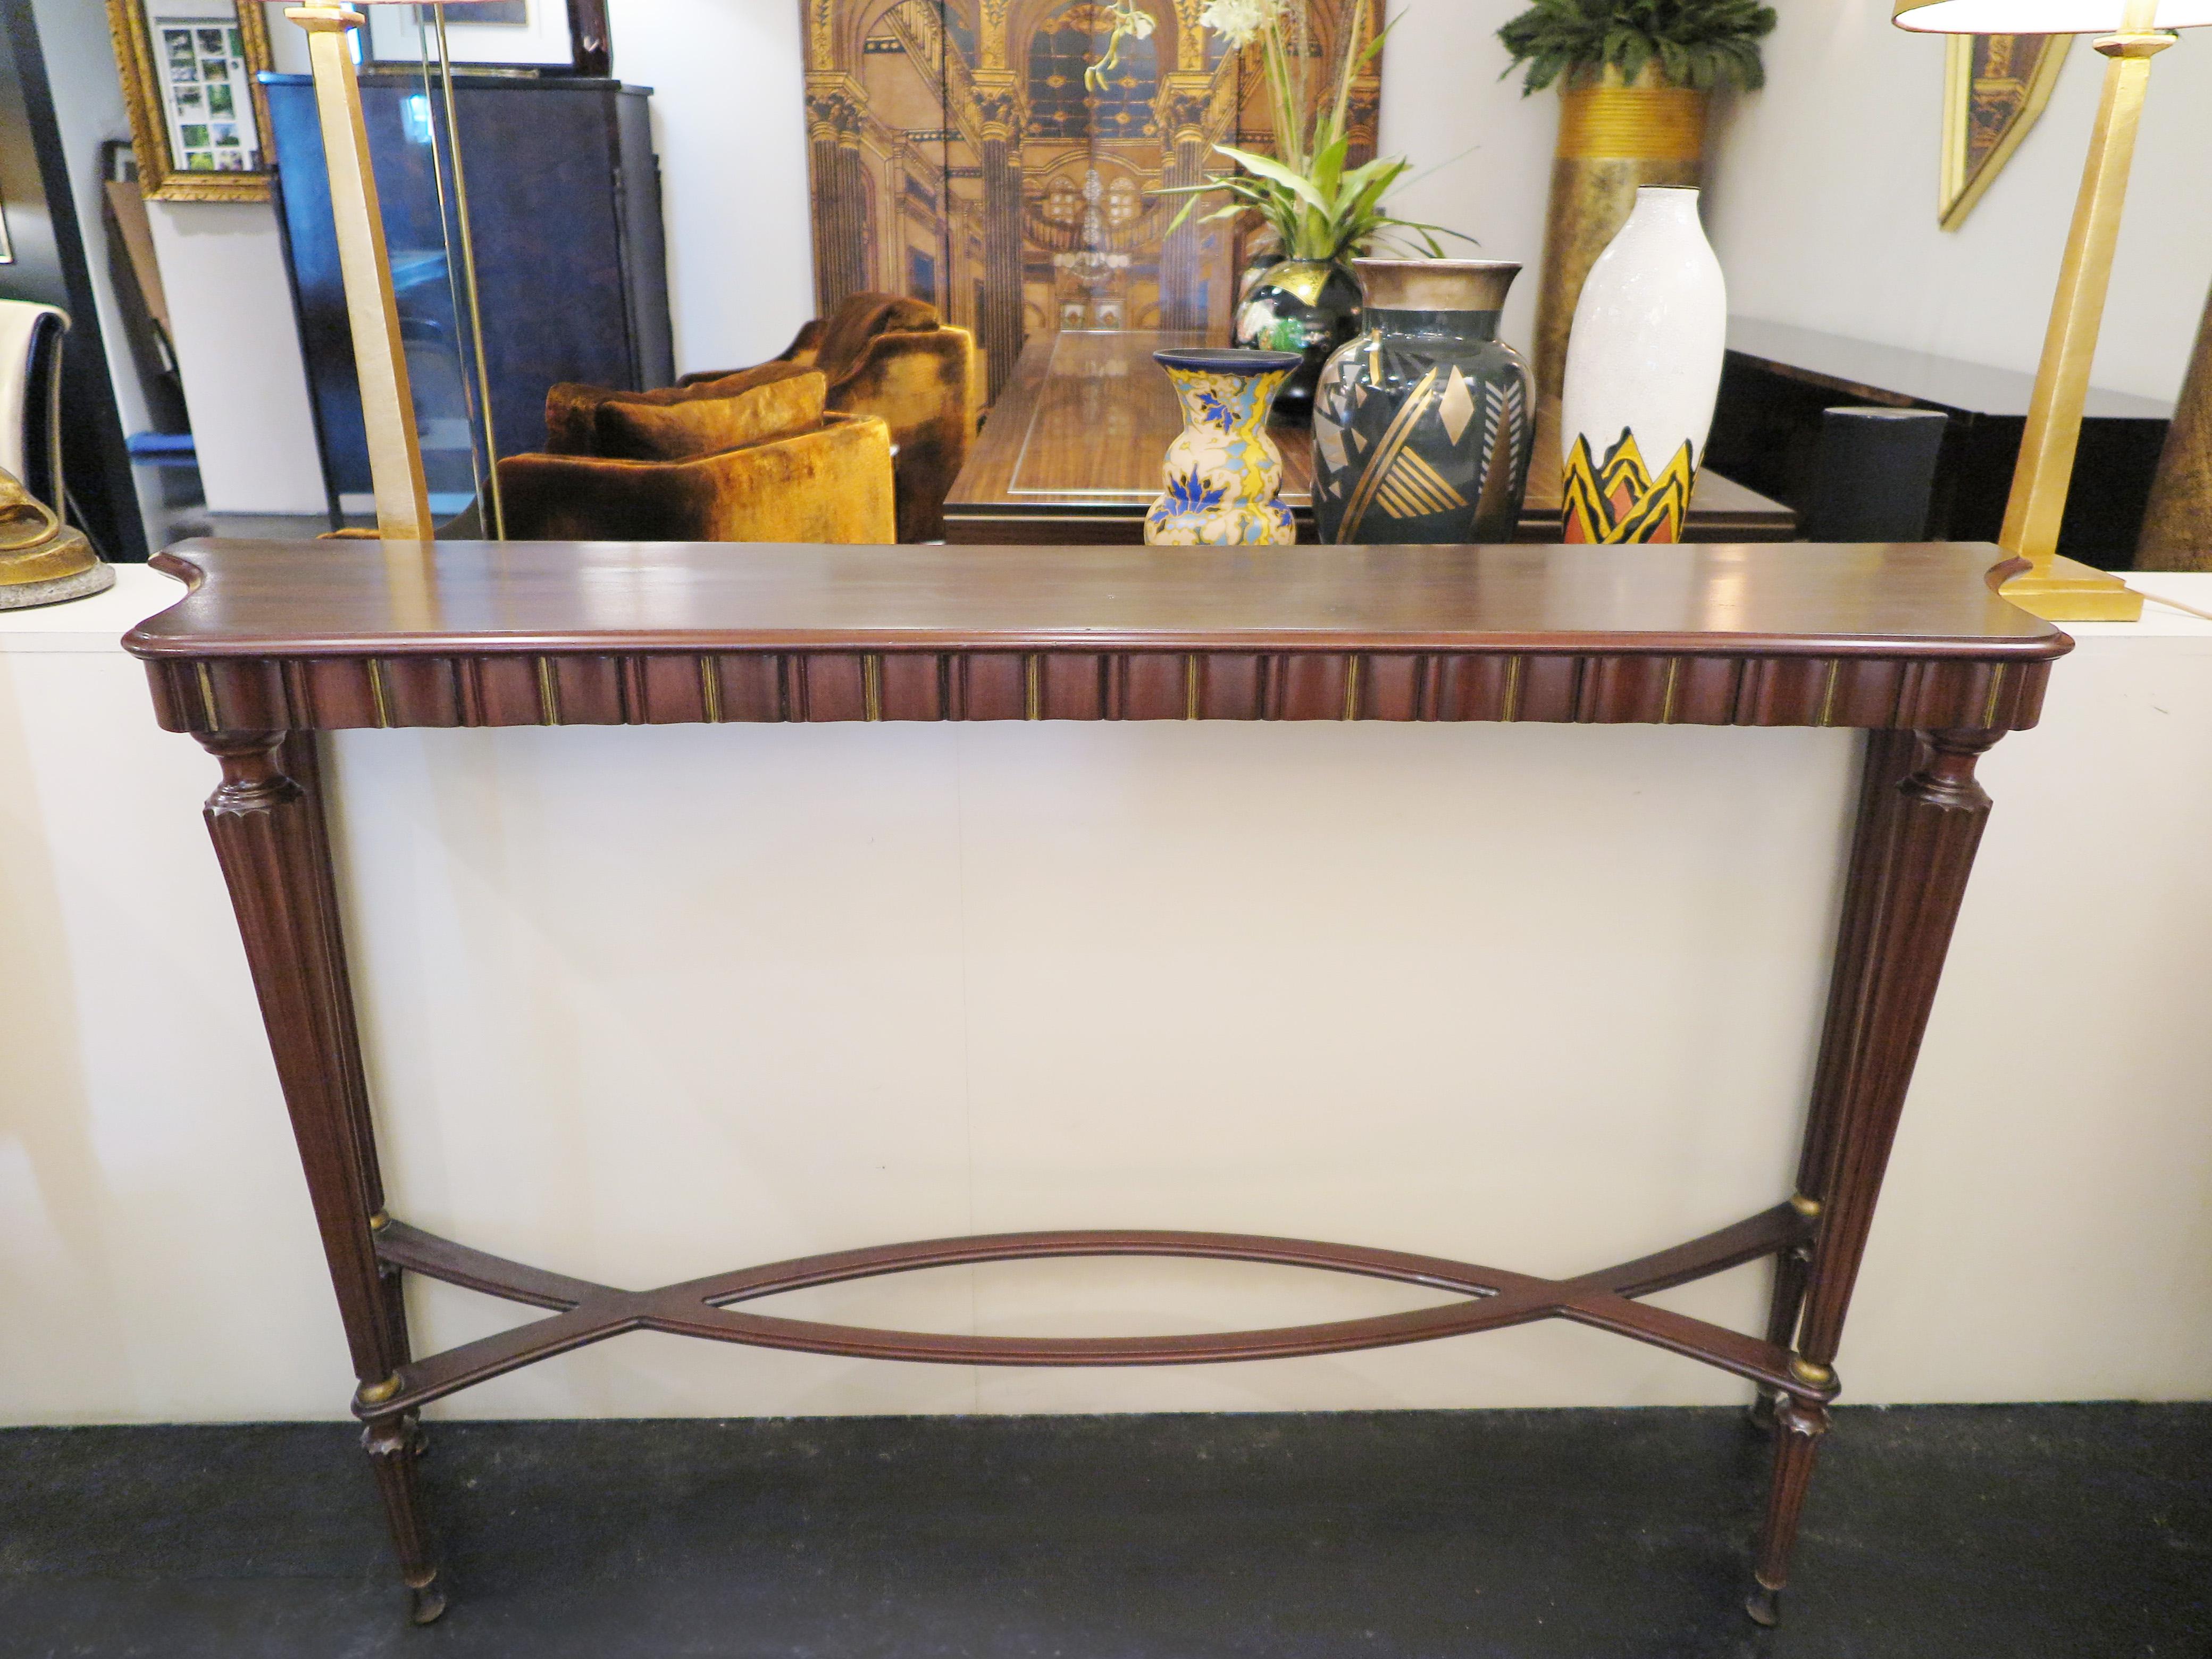 Italian Mid-Century console in mahogany with beautiful fluted detailing along facade and sides. Four ribbed tapered legs support the delicate frame. The original brass hardware and leaf accents add the finishing touch. The back plate along the top